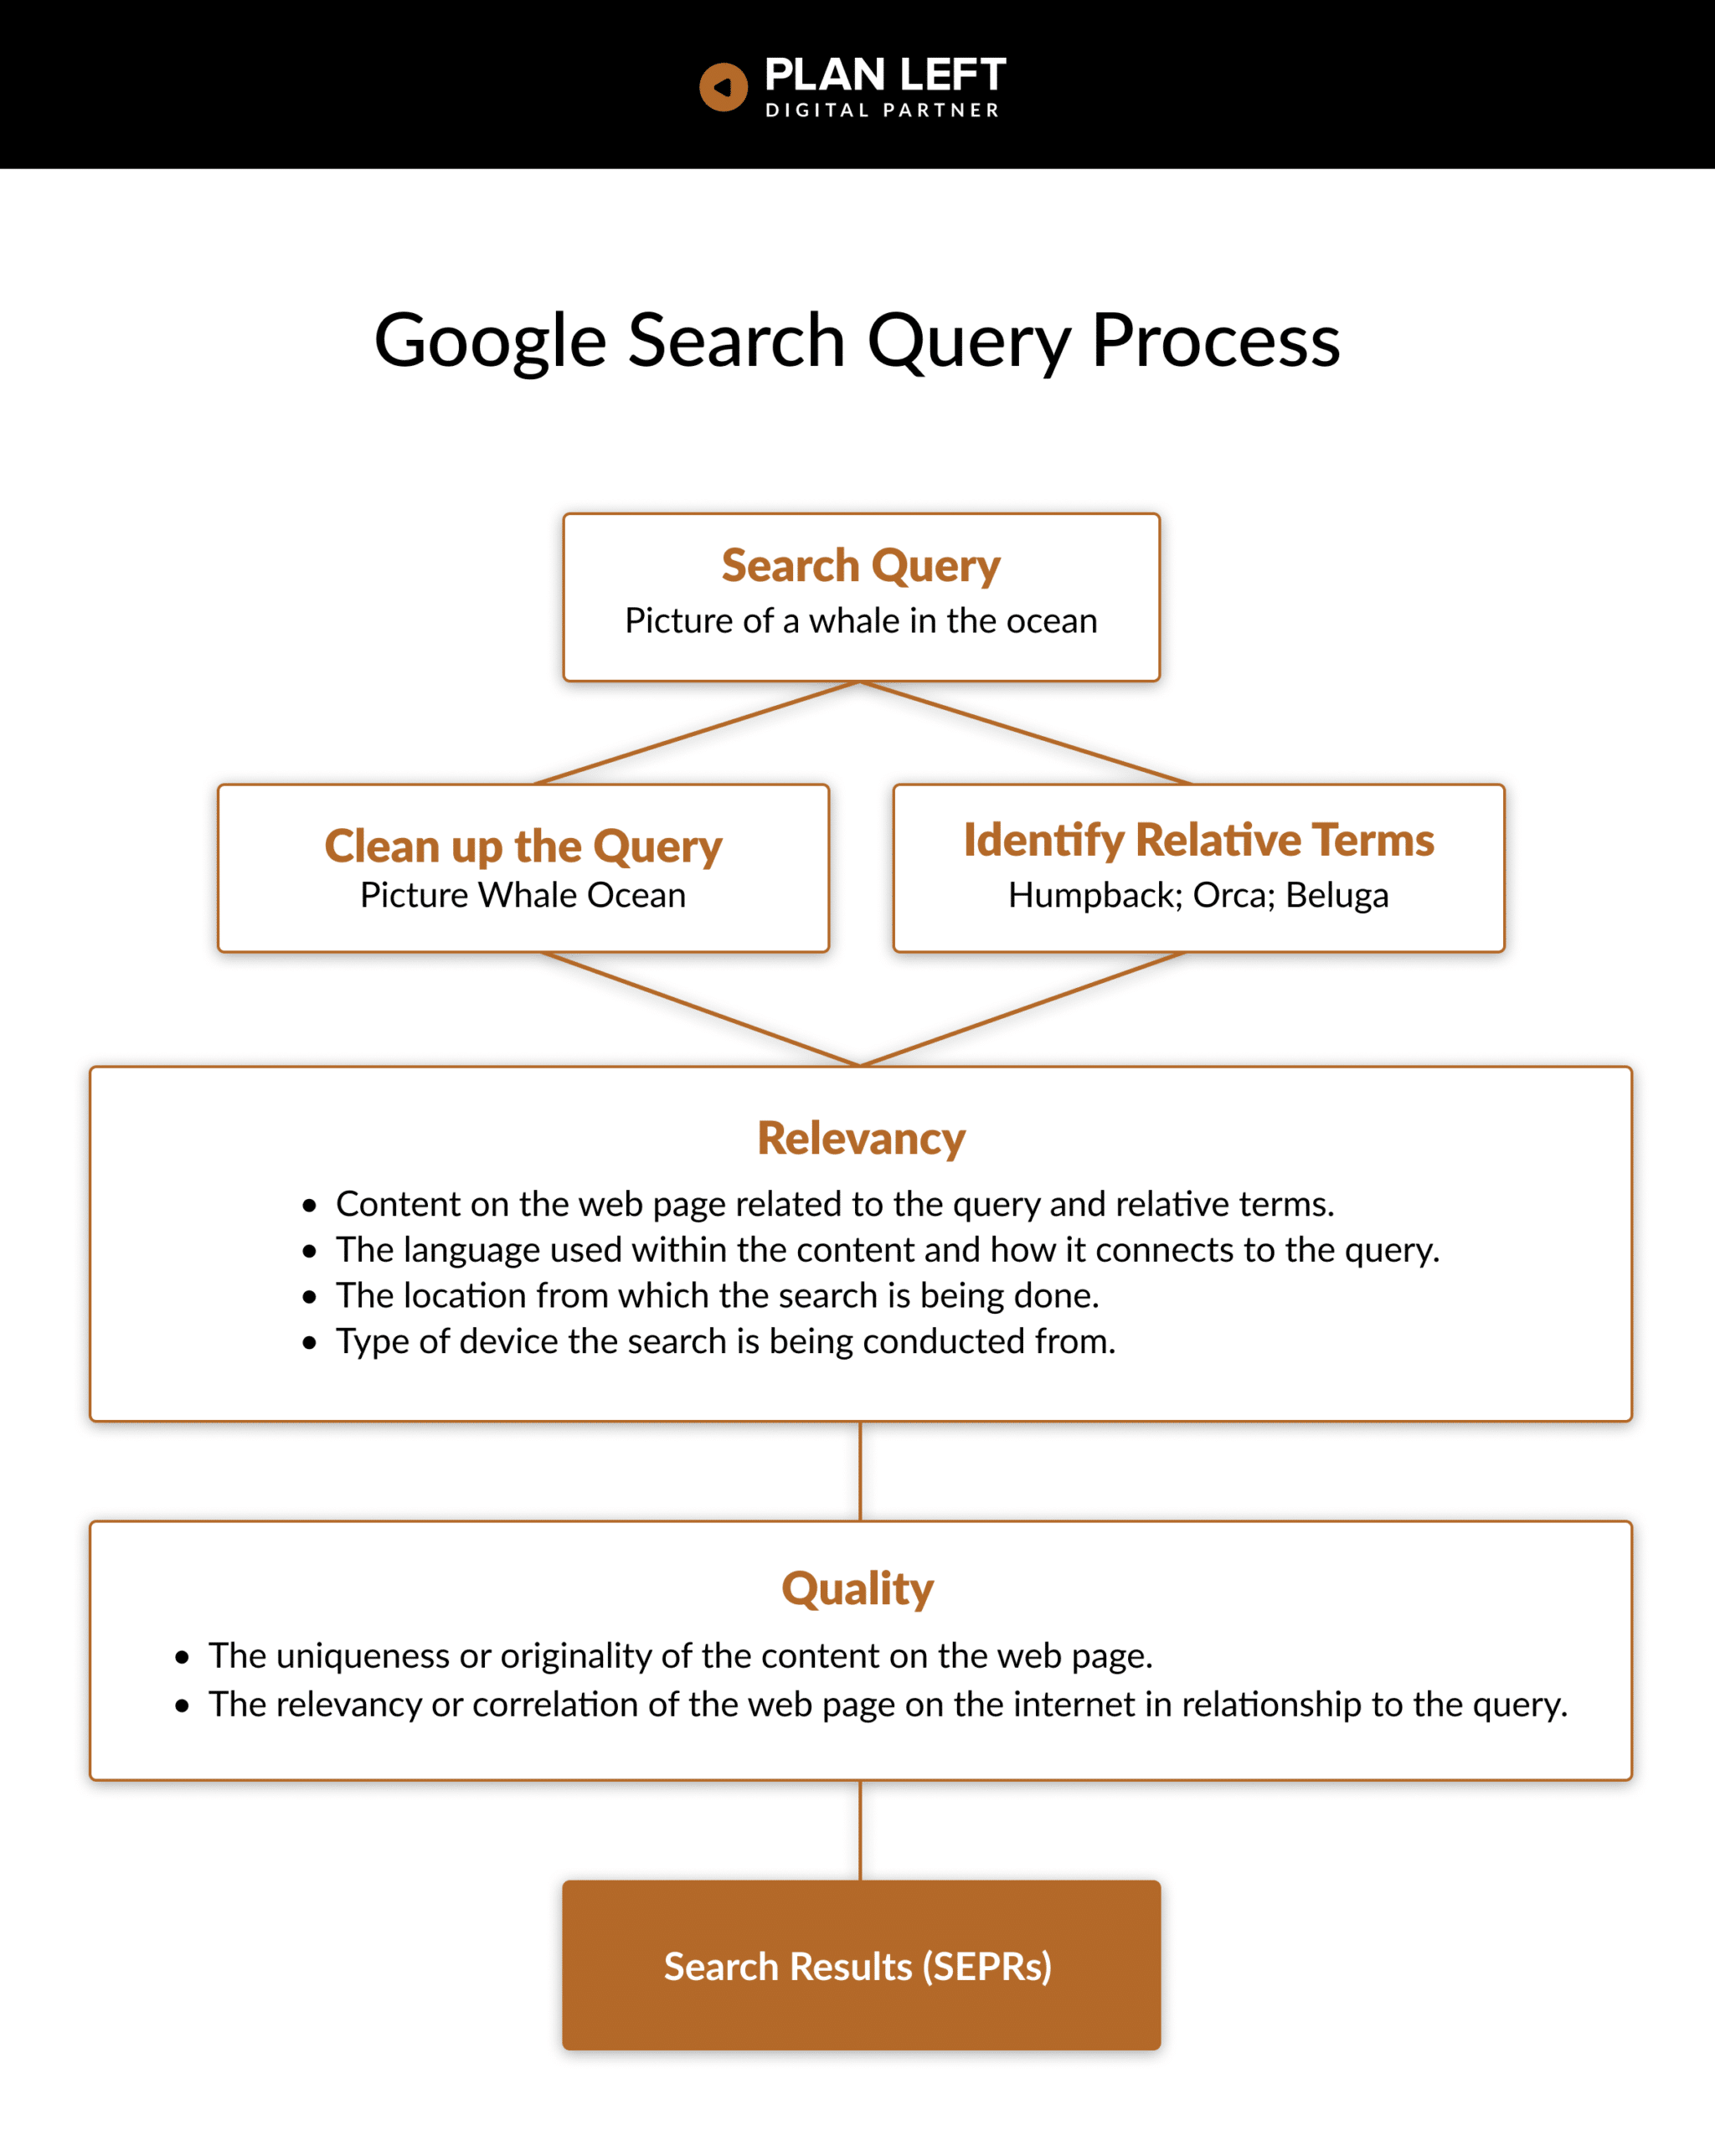 Google Search Query Process flow chart breaking down the process of how Google takes the query to Search Results.